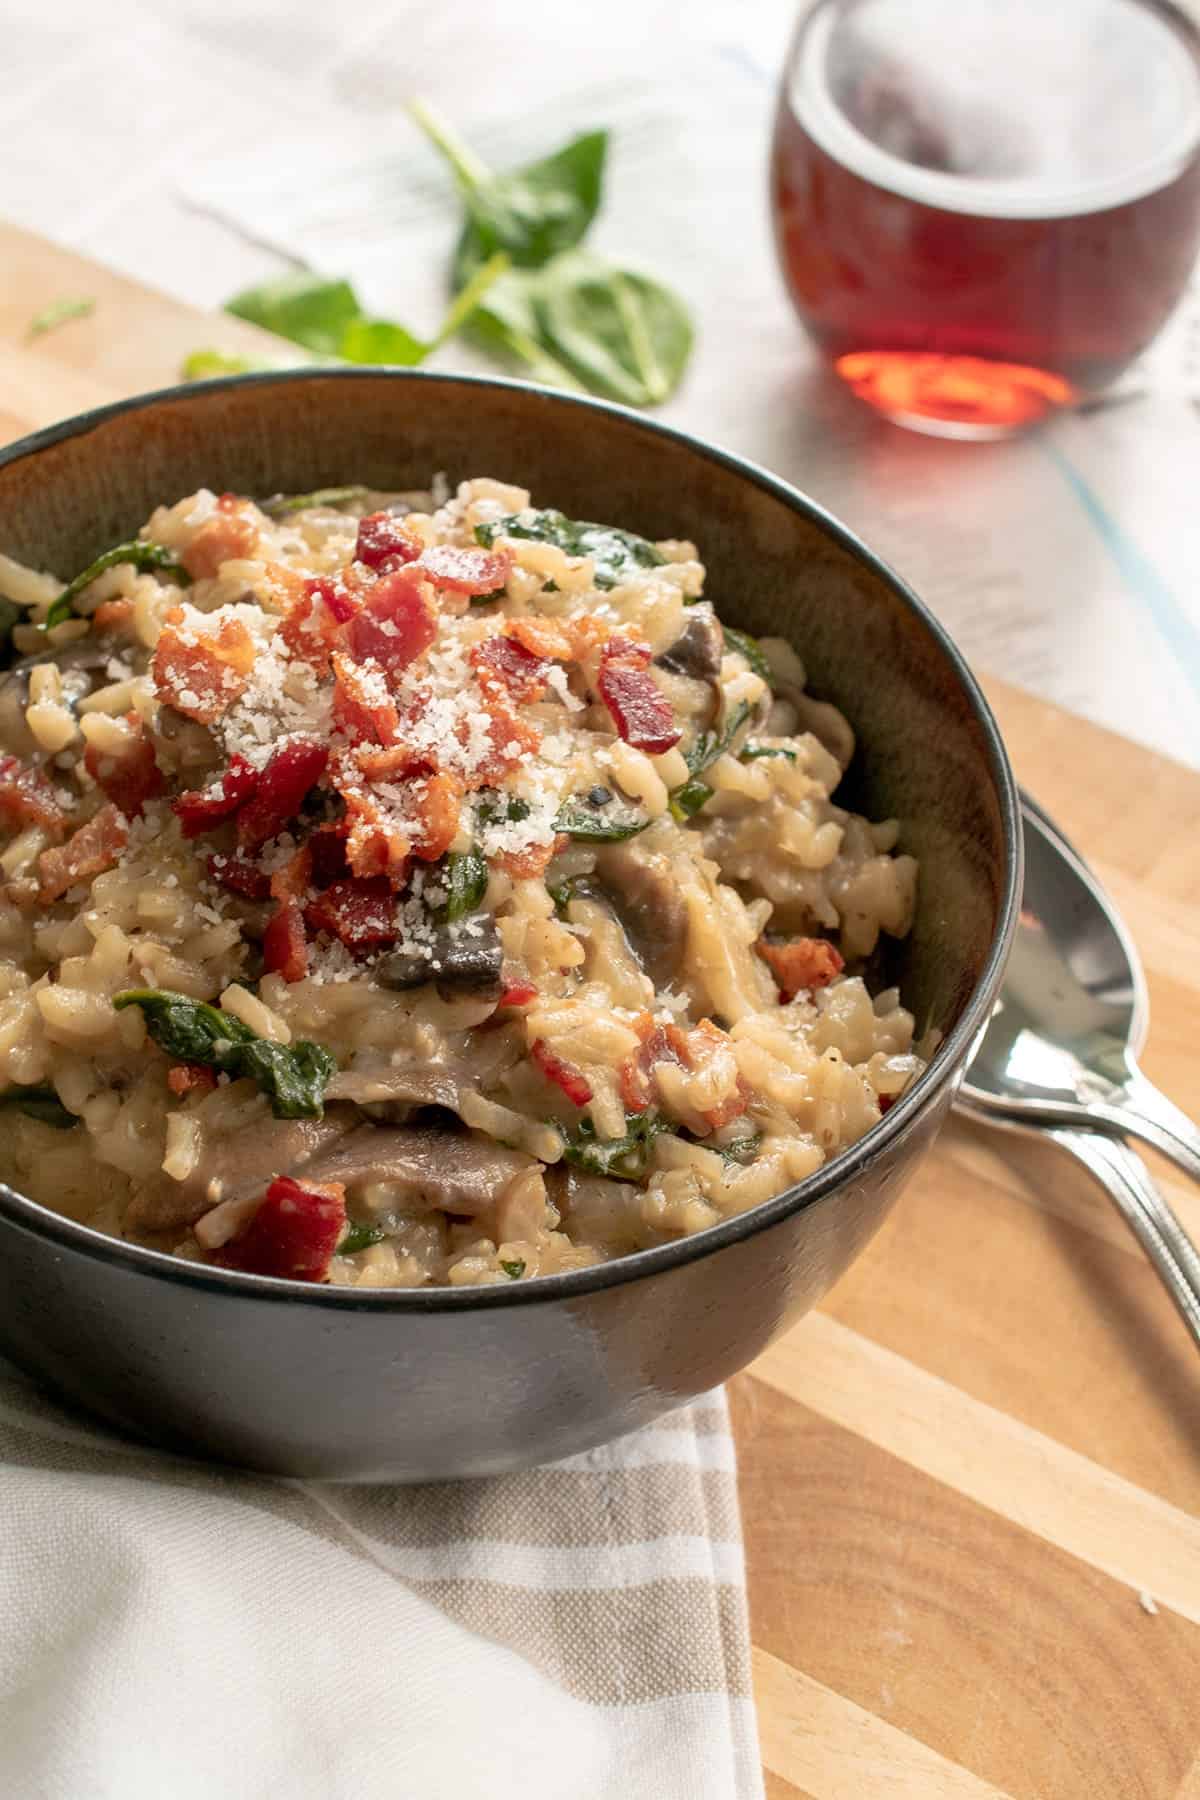 Creamy Mushroom Risotto with spinach topped with bacon in black bowl on wooden cutting board next to spoons and tea towel 